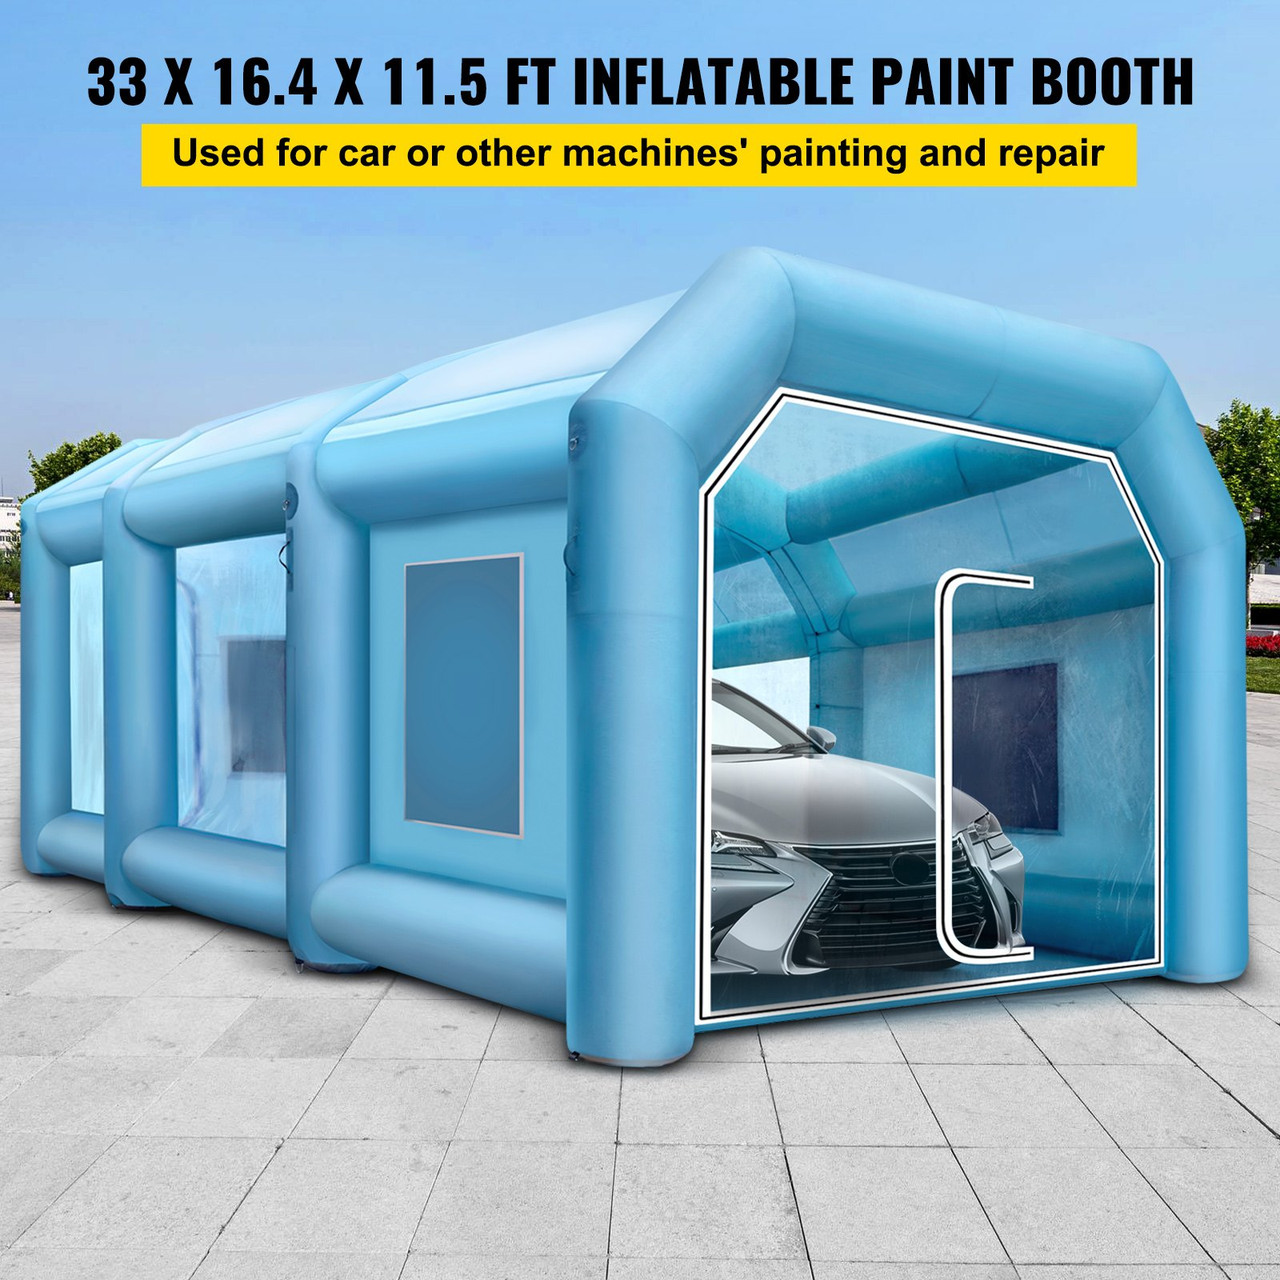 Portable Inflatable Paint Booth, 28x15x10ft Inflatable Spray Booth